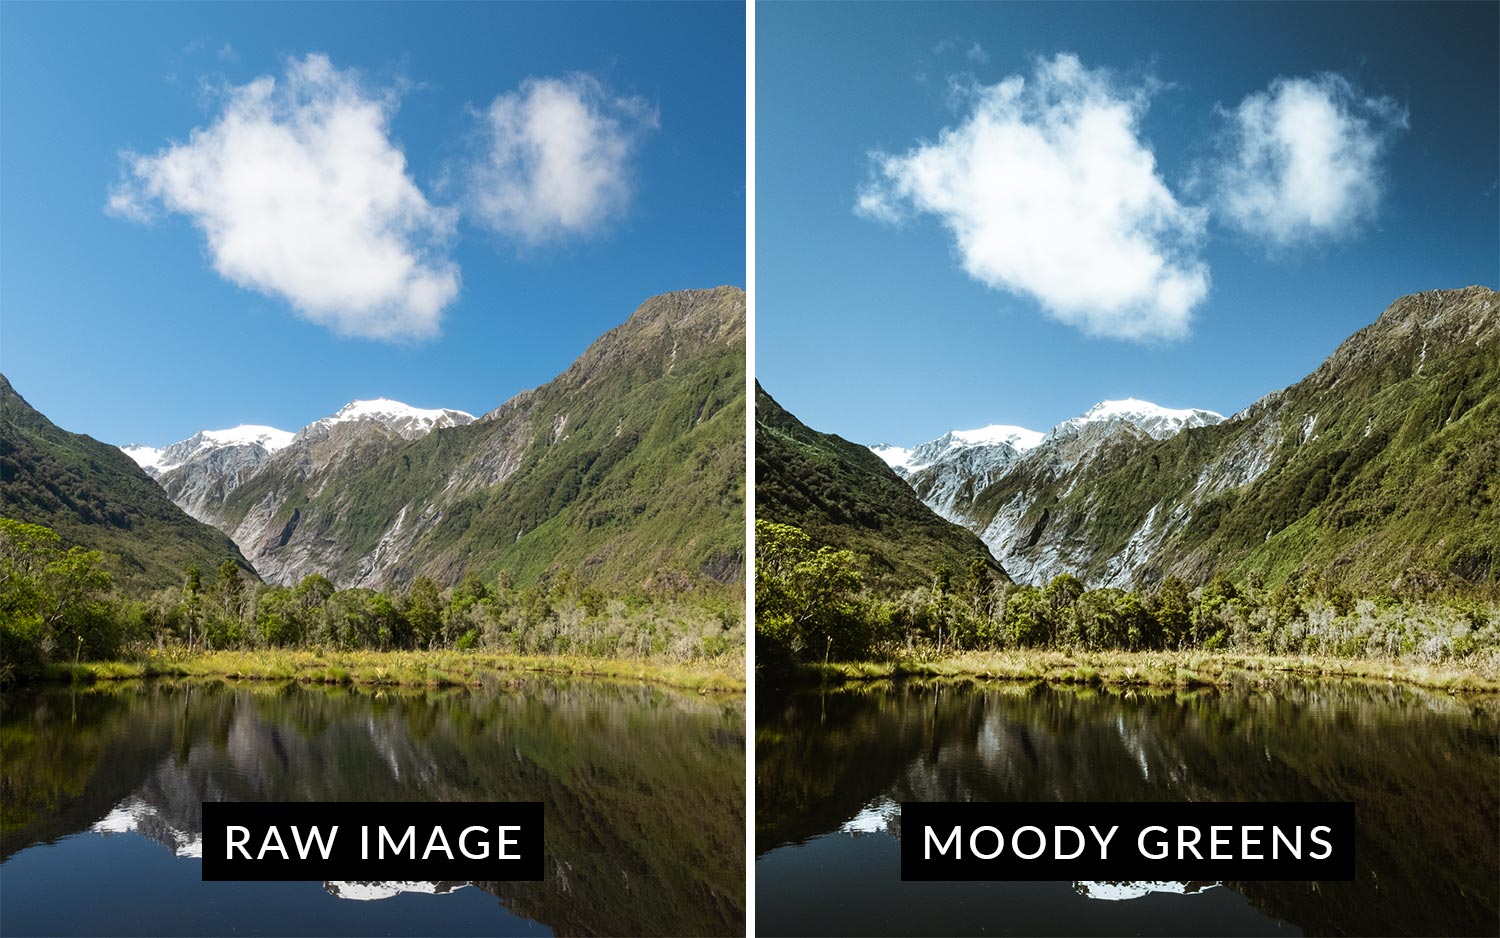 A before and after comparison showing the Moody Greens preset which is included in this moody Lightroom presets package.